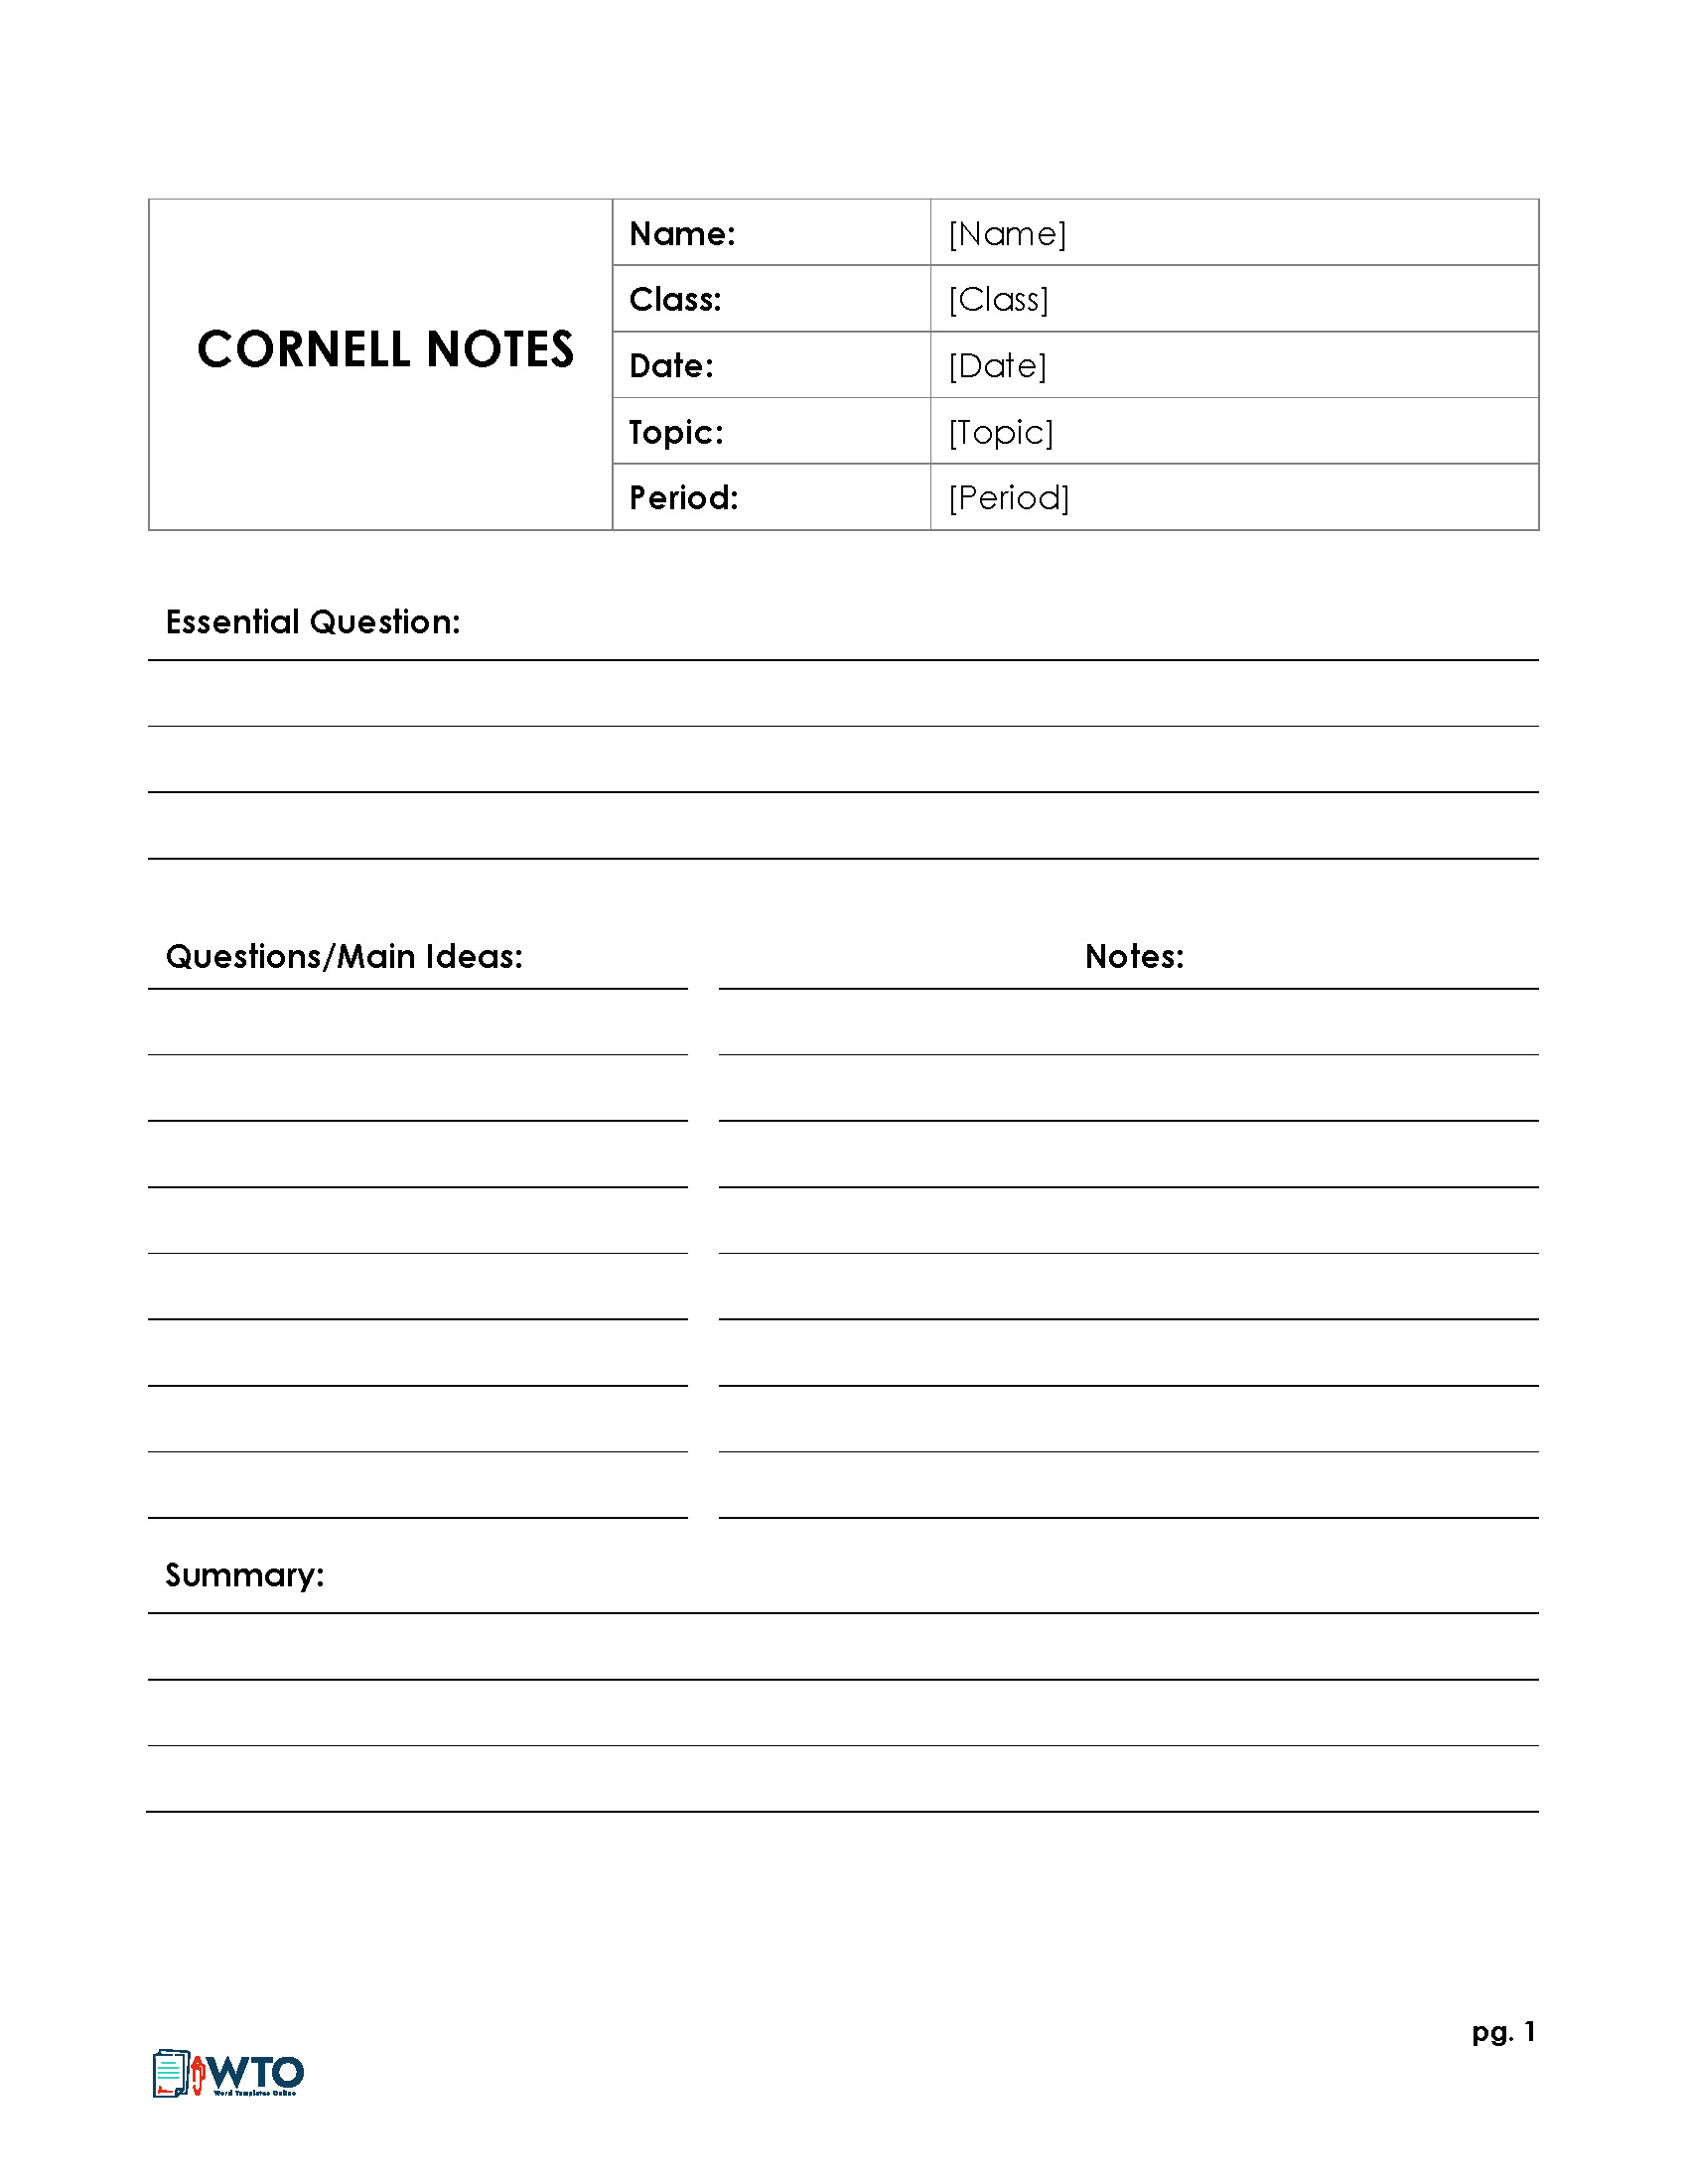 23 Free Cornell Note Templates (Cornell Note Taking Explained) In Note Taking Word Template